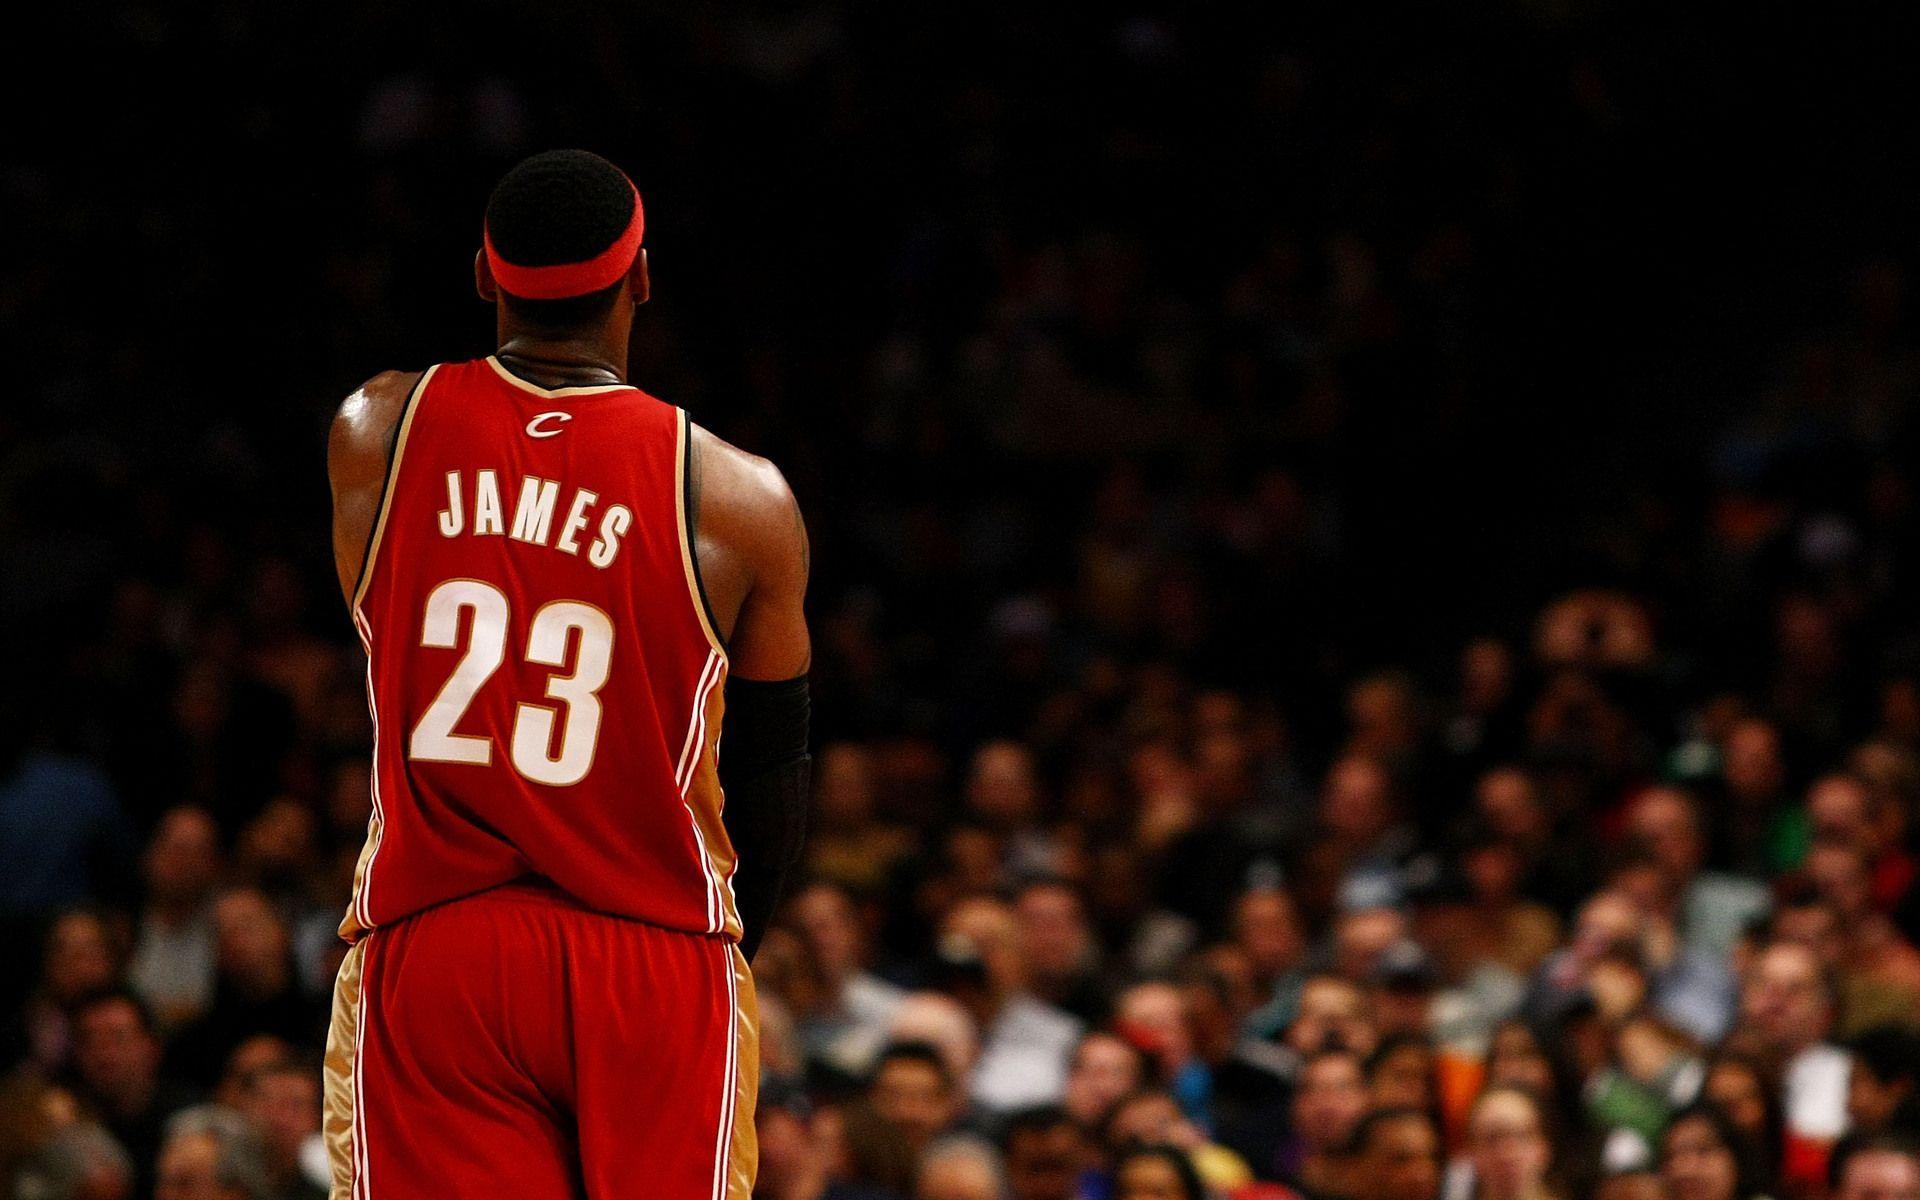 LeBron James Wallpaper High Resolution and Quality Download